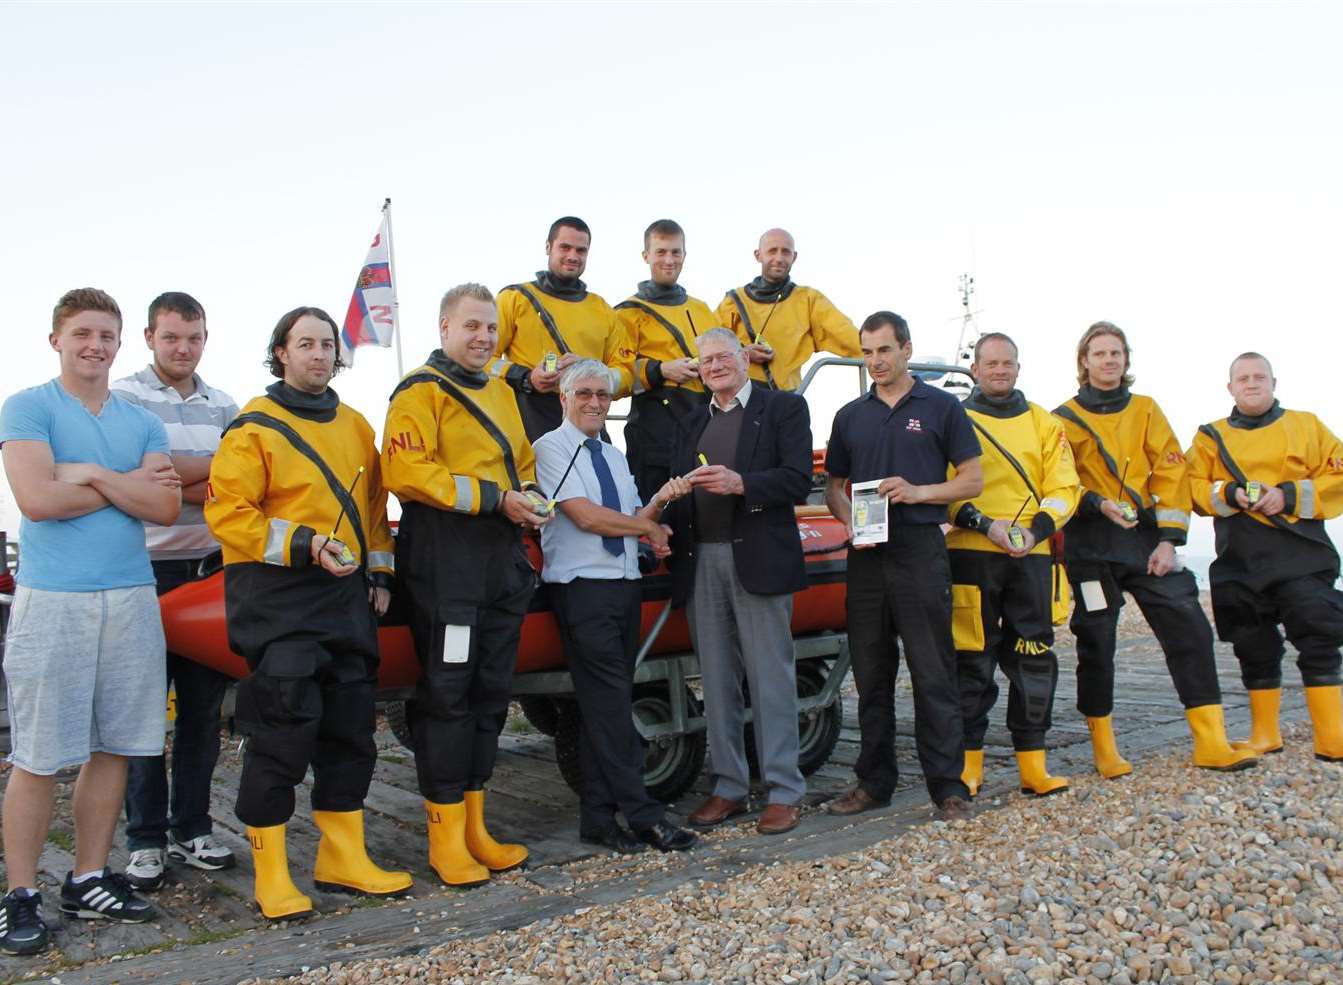 Lifeboat volunteers with their personal locator beacons funded by a donation in memory of a supporter of the station